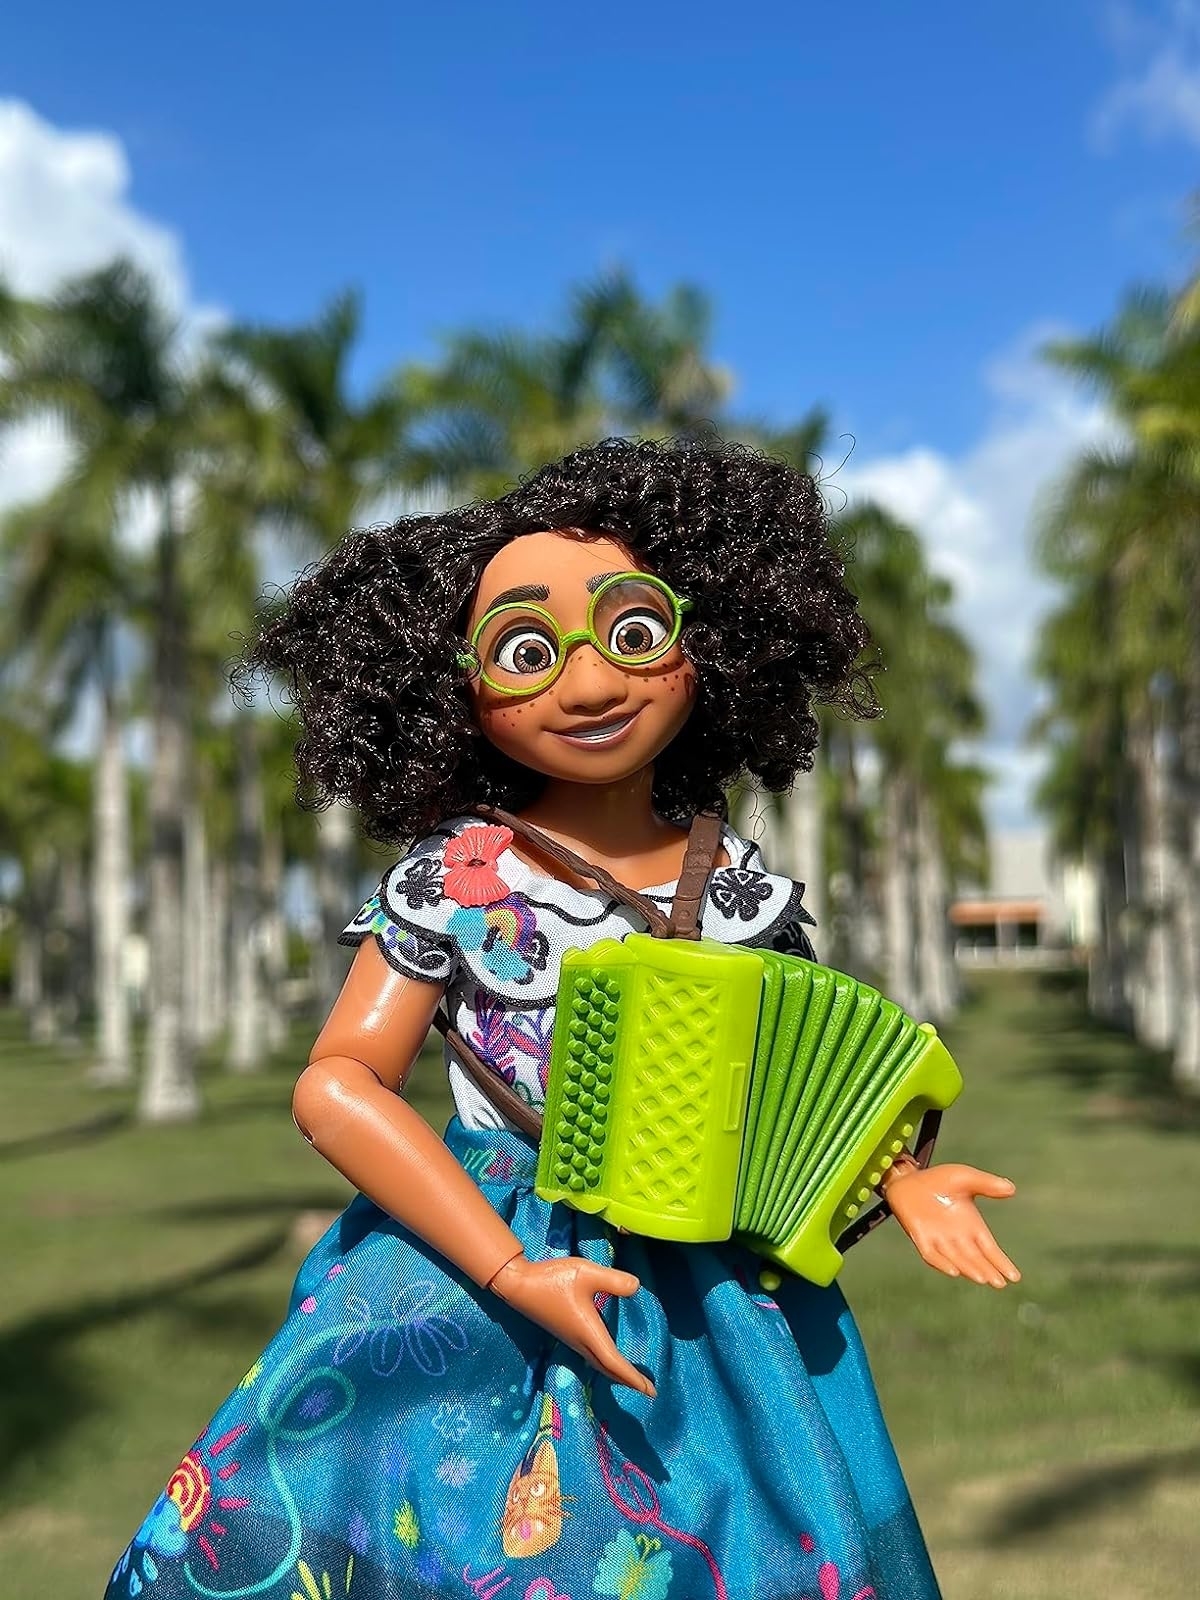 Doll character with an accordion, wearing a floral pattern dress and glasses, outdoors with palm trees in the background